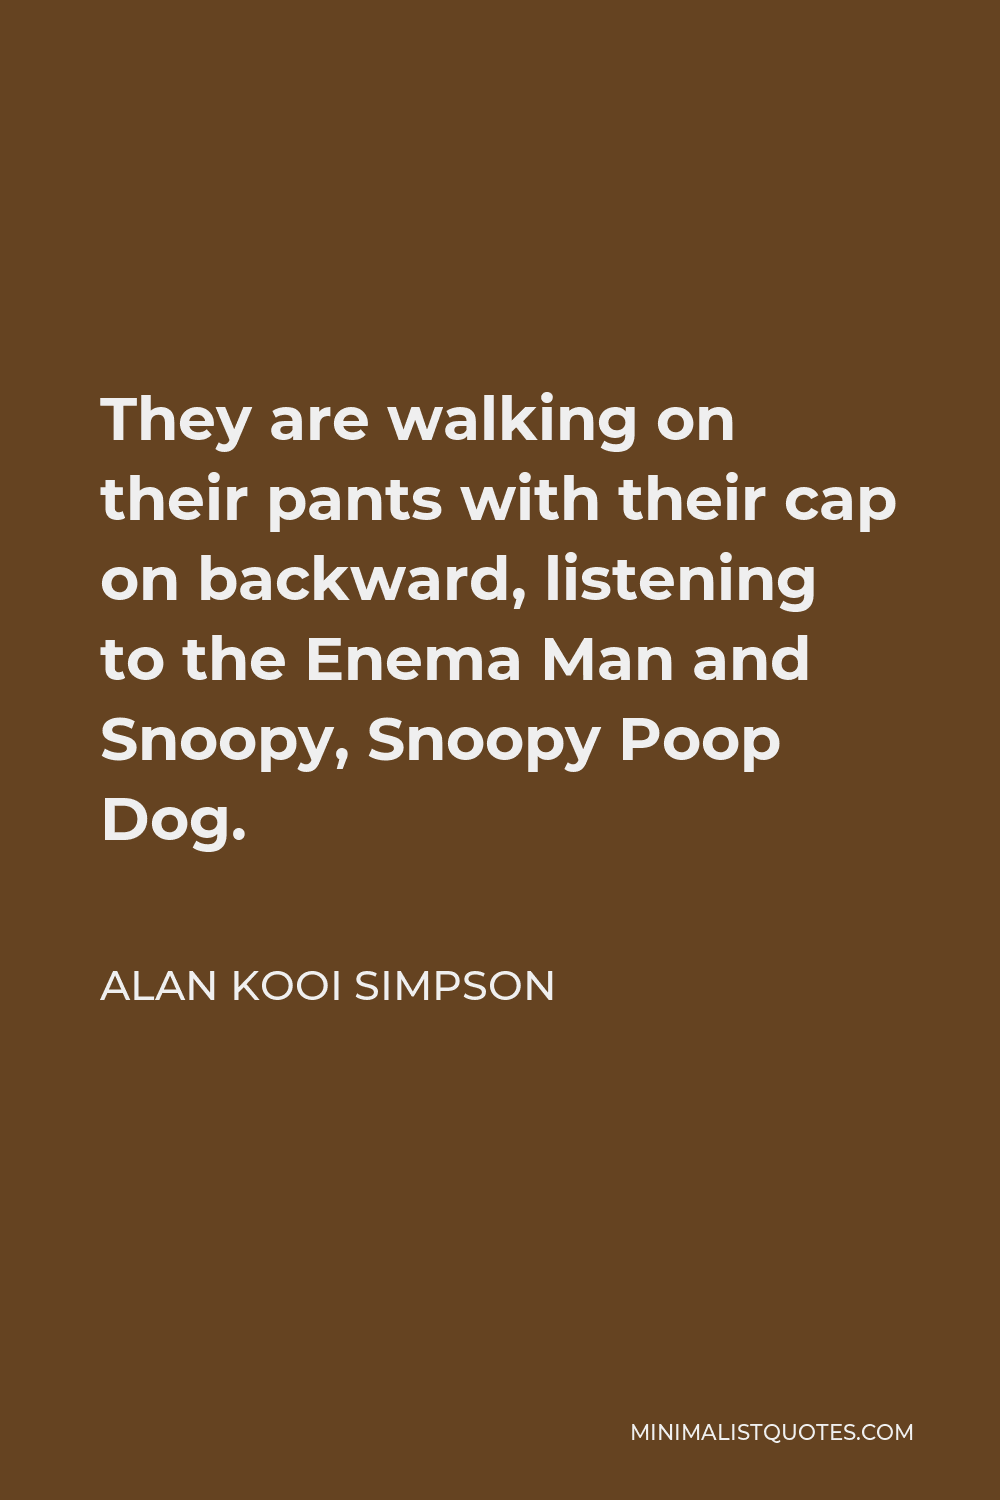 Alan Kooi Simpson Quote - They are walking on their pants with their cap on backward, listening to the Enema Man and Snoopy, Snoopy Poop Dog.